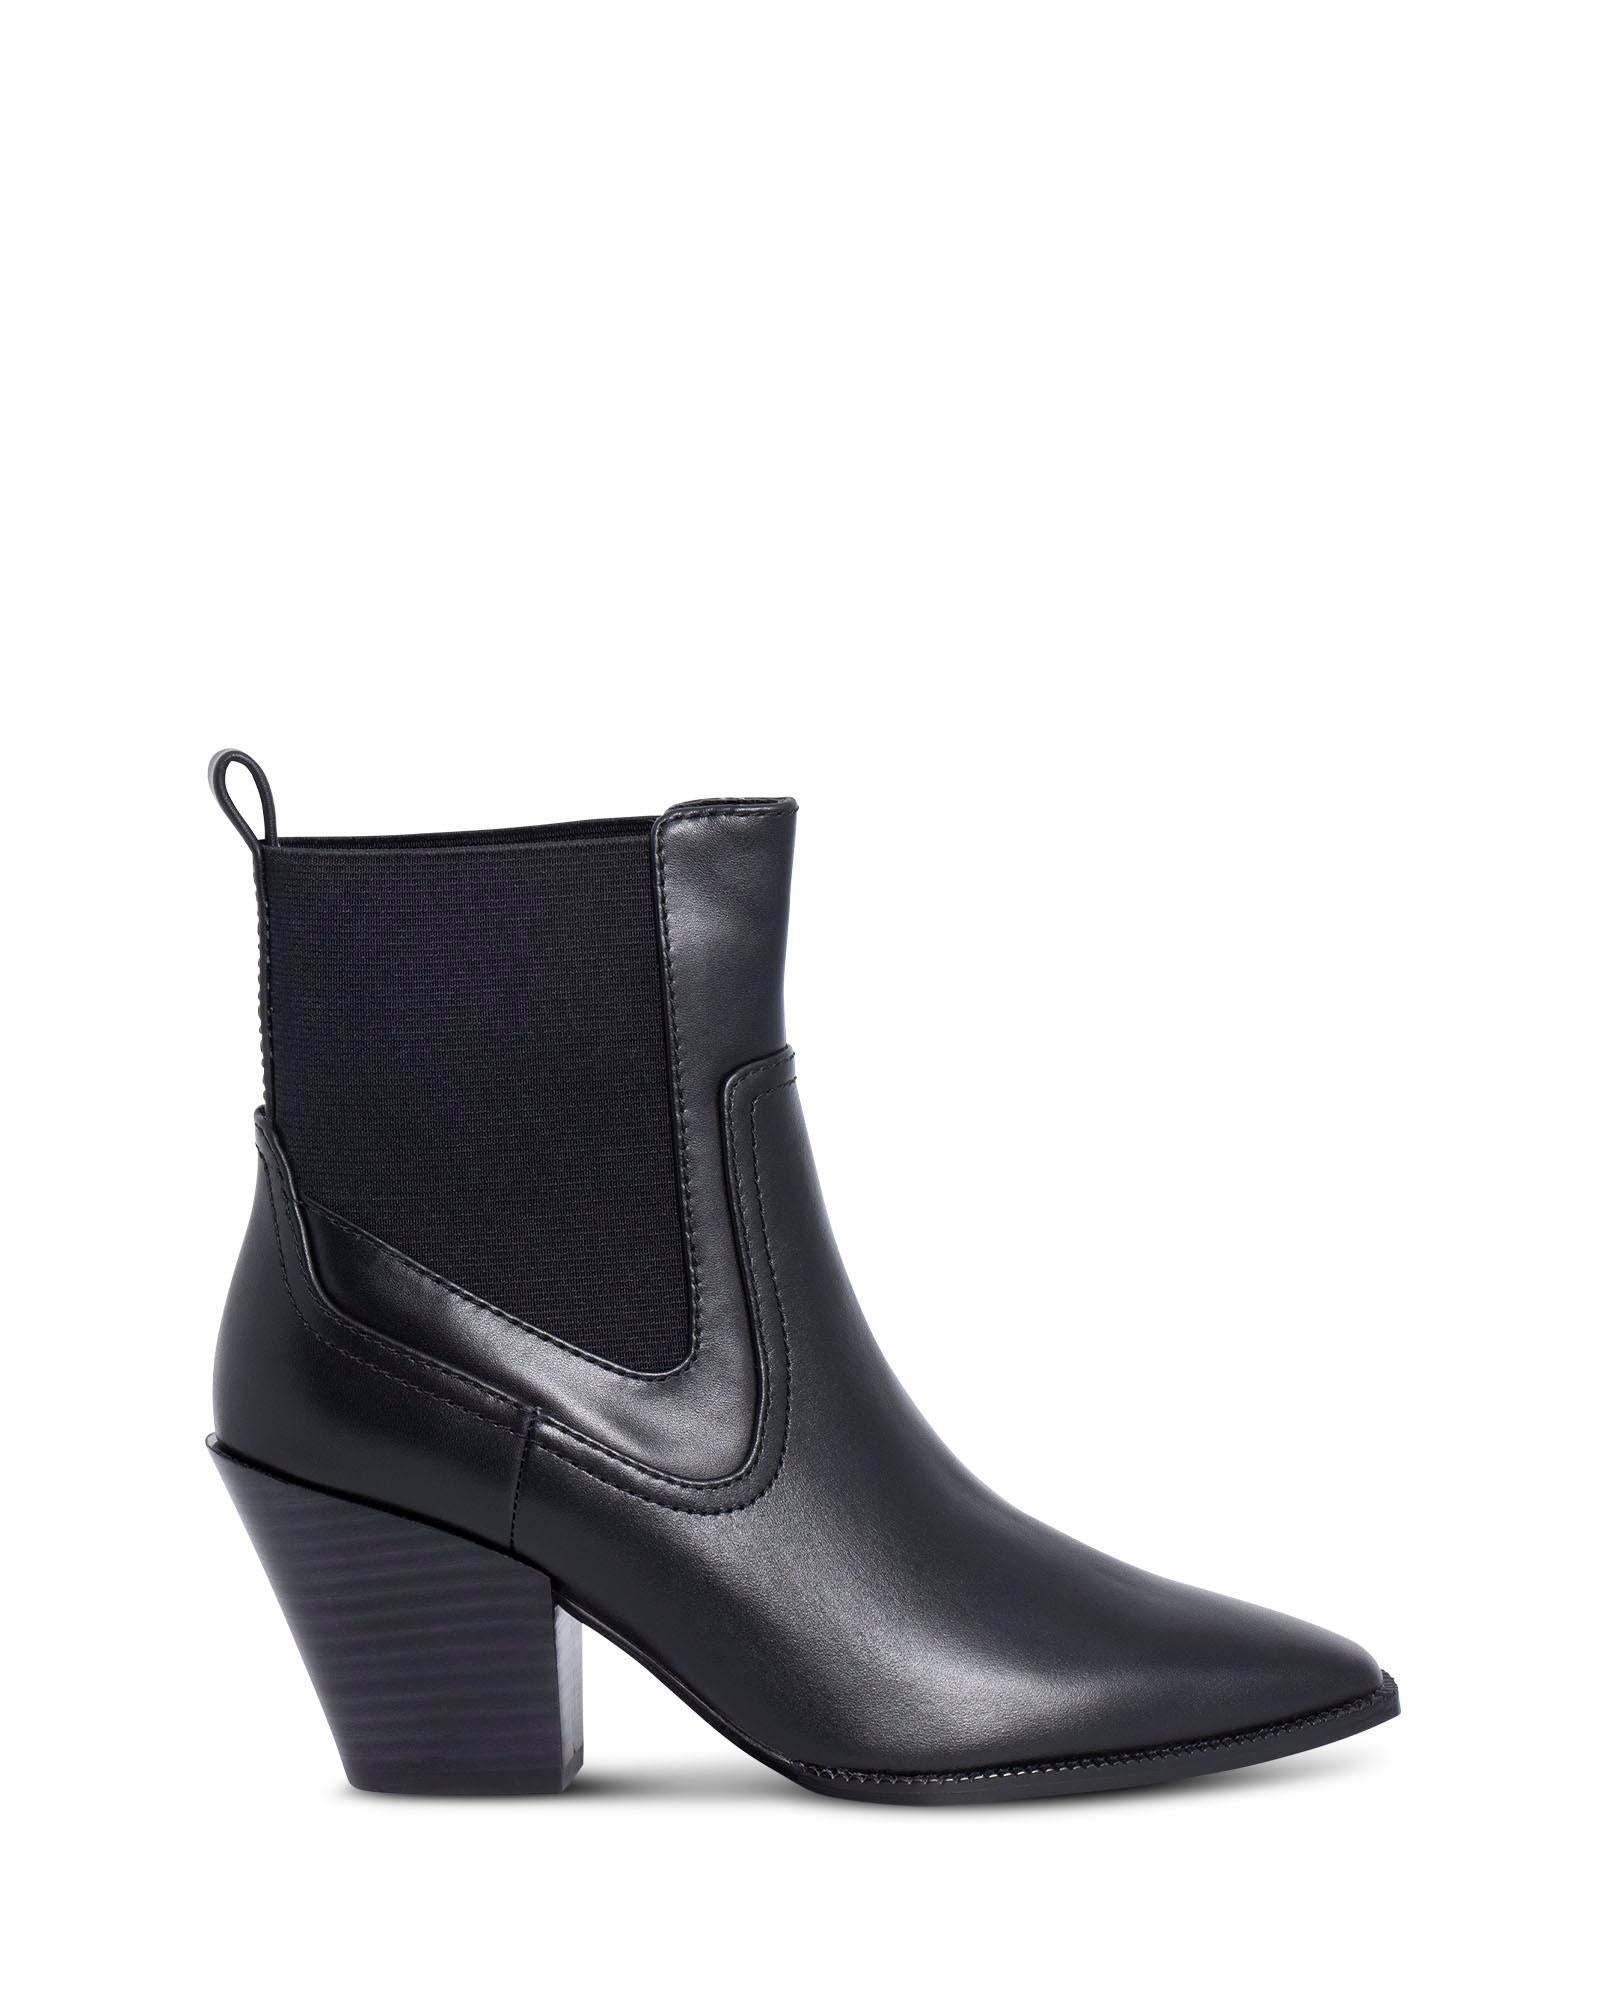 Norwich Black 7cm Western Style Ankle Boot 